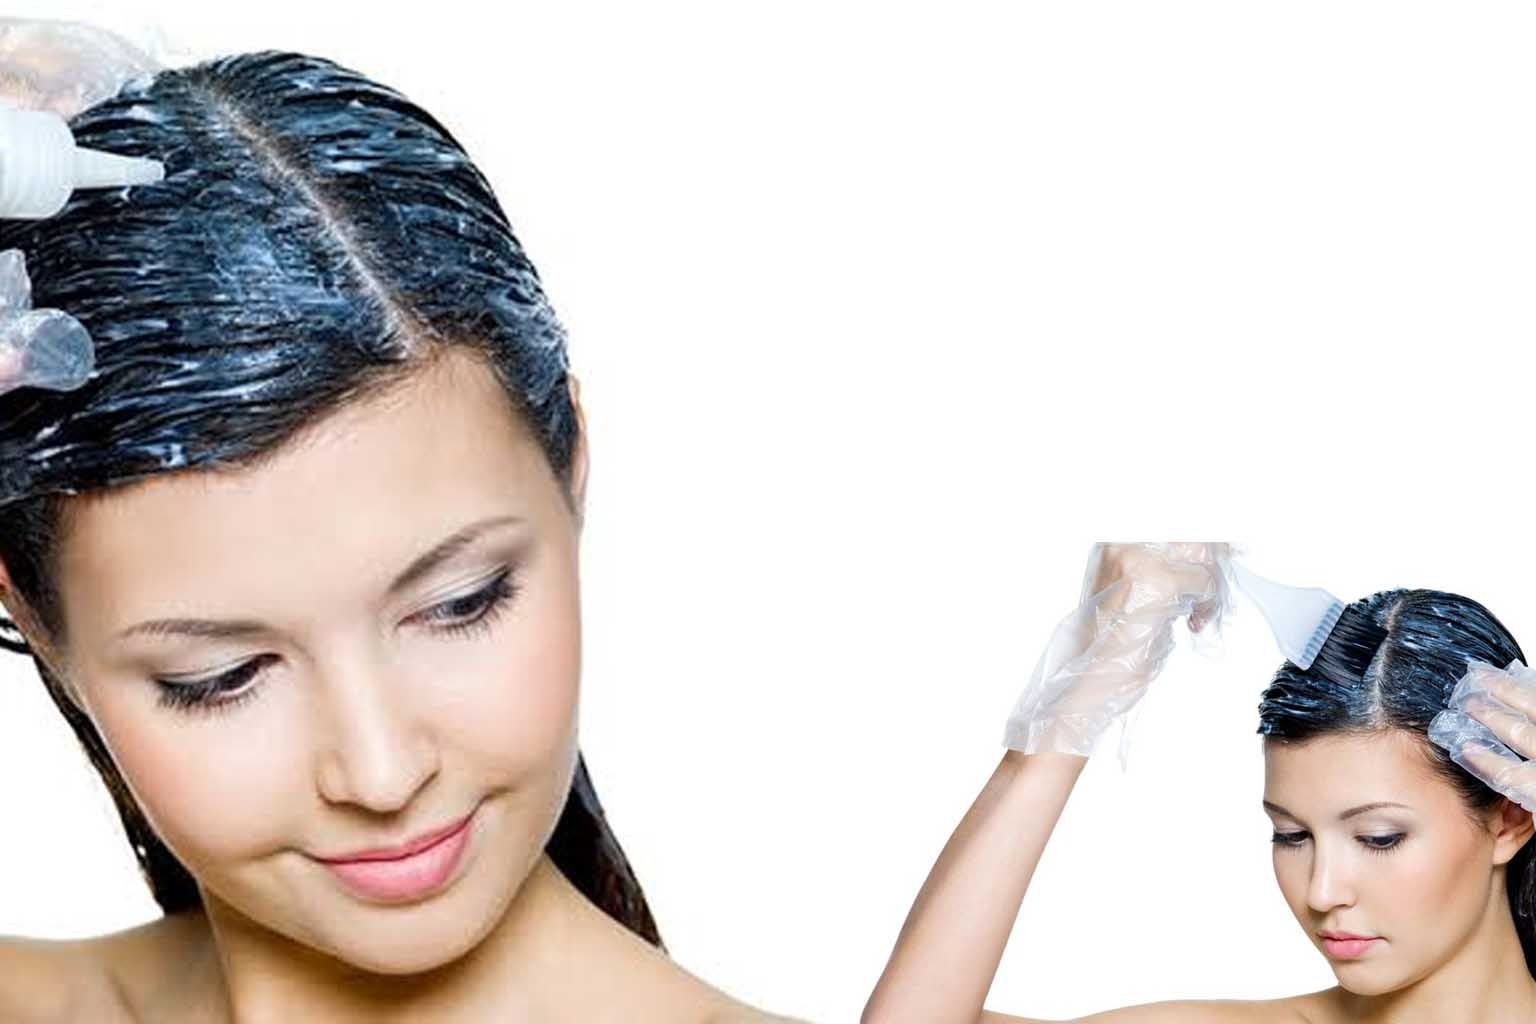 dyeing hair safely